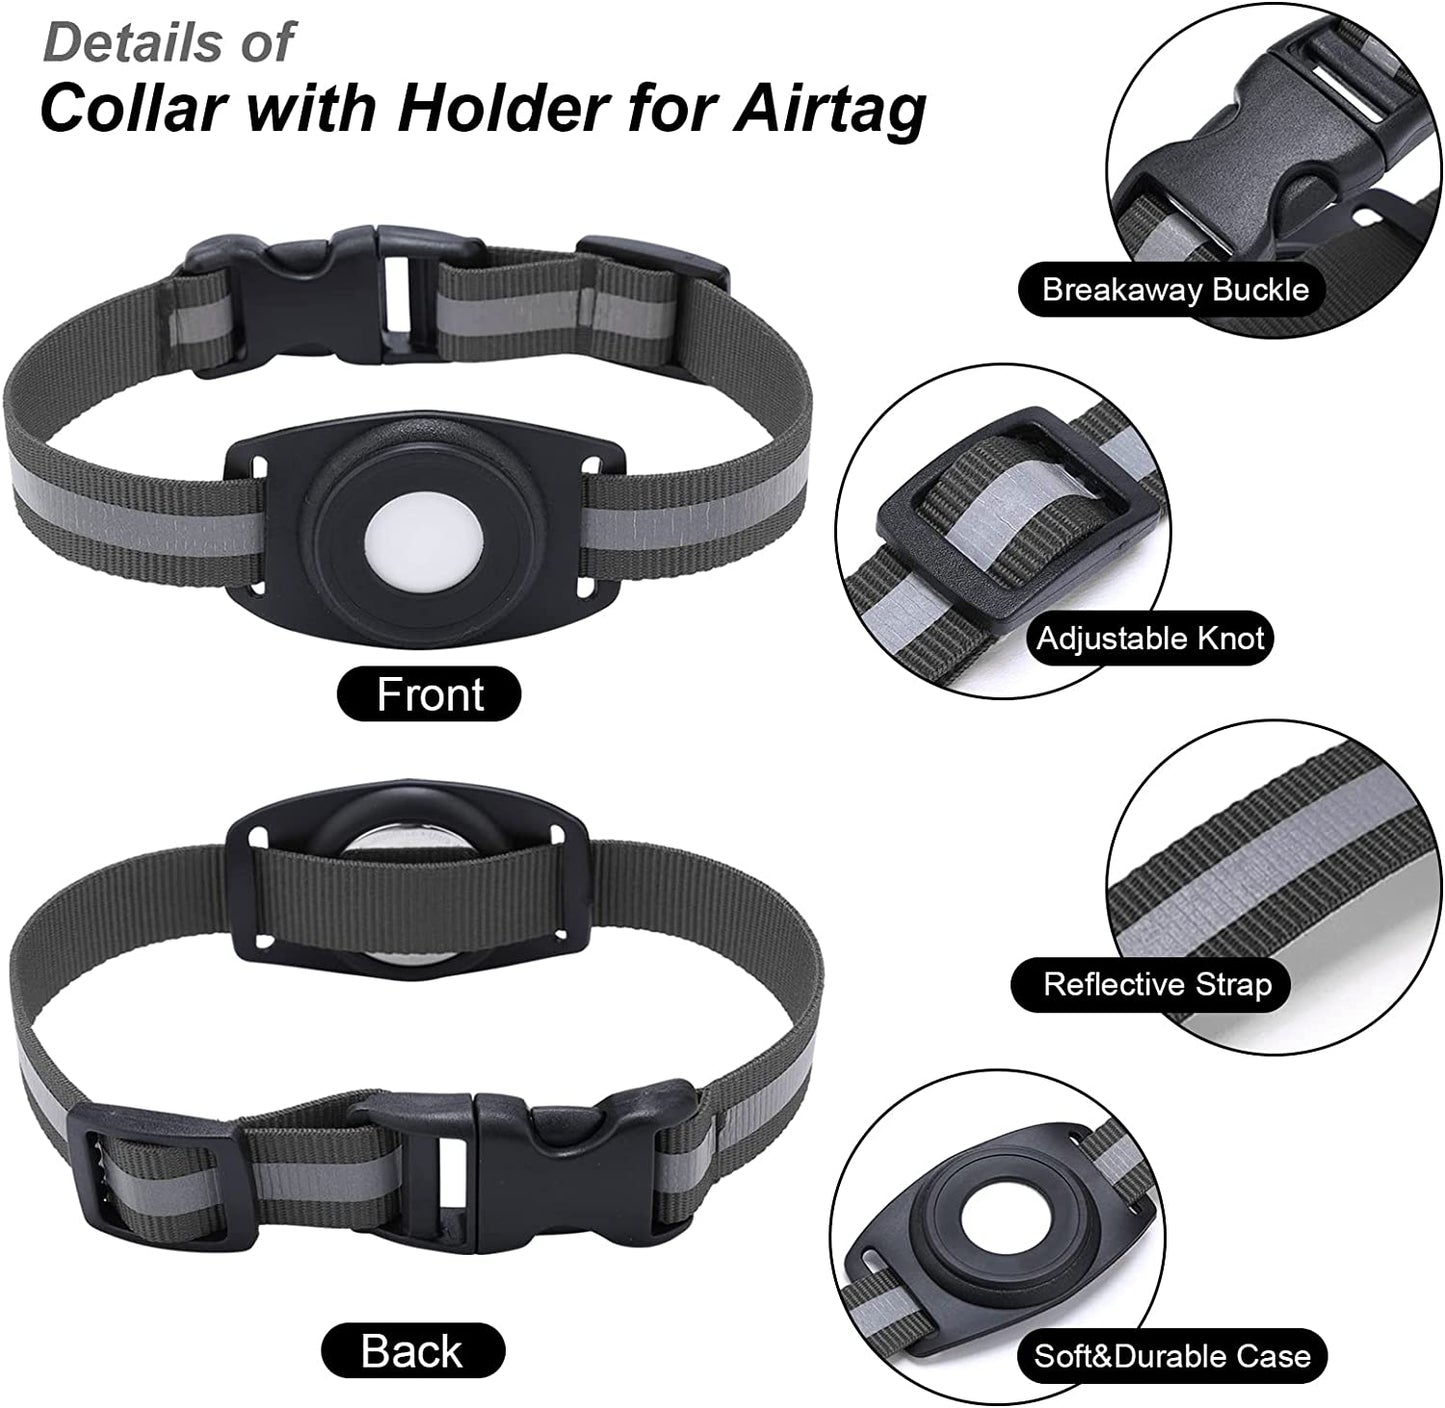 Simplethings for Airtag Cat Collar, Reflective Collar Designed for Airtag Small Pets Cat Puppy Dog Collar (Black)